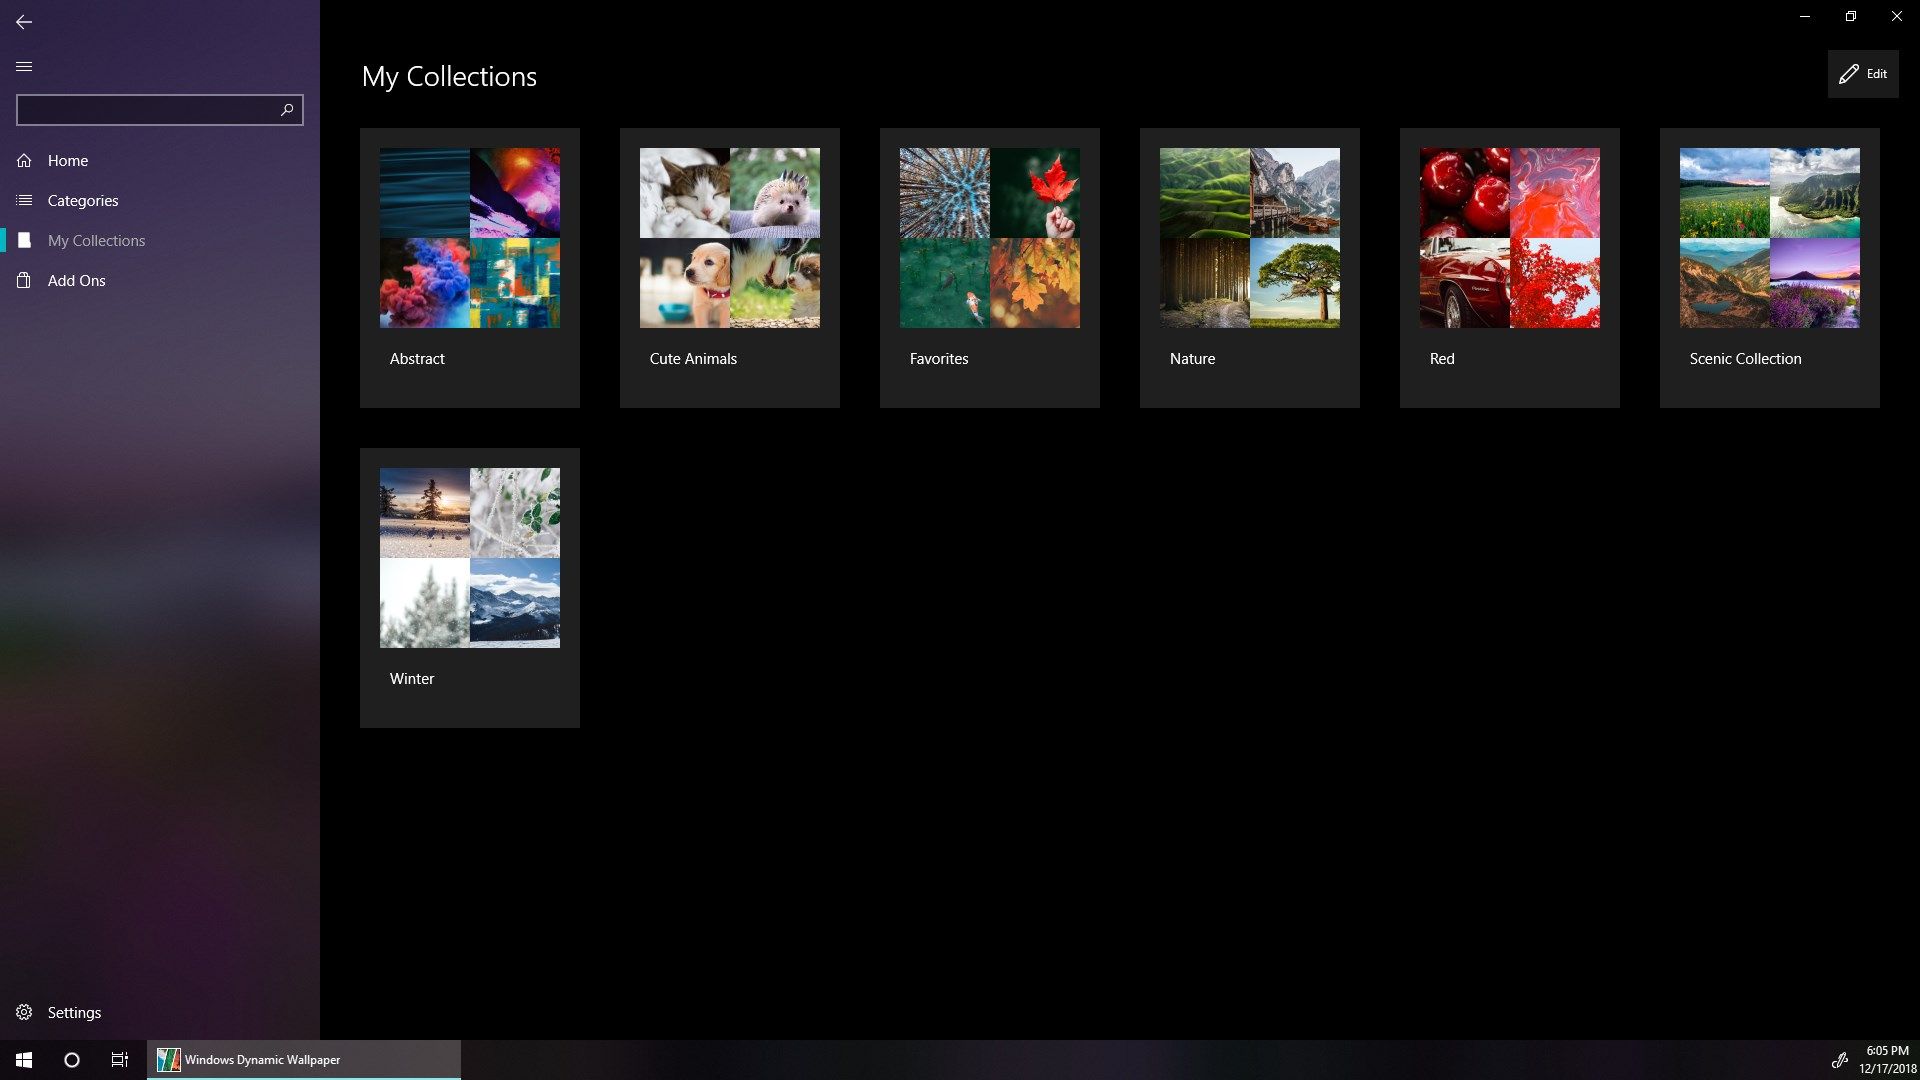 Save your own collections and set them as your dynamic wallpaper